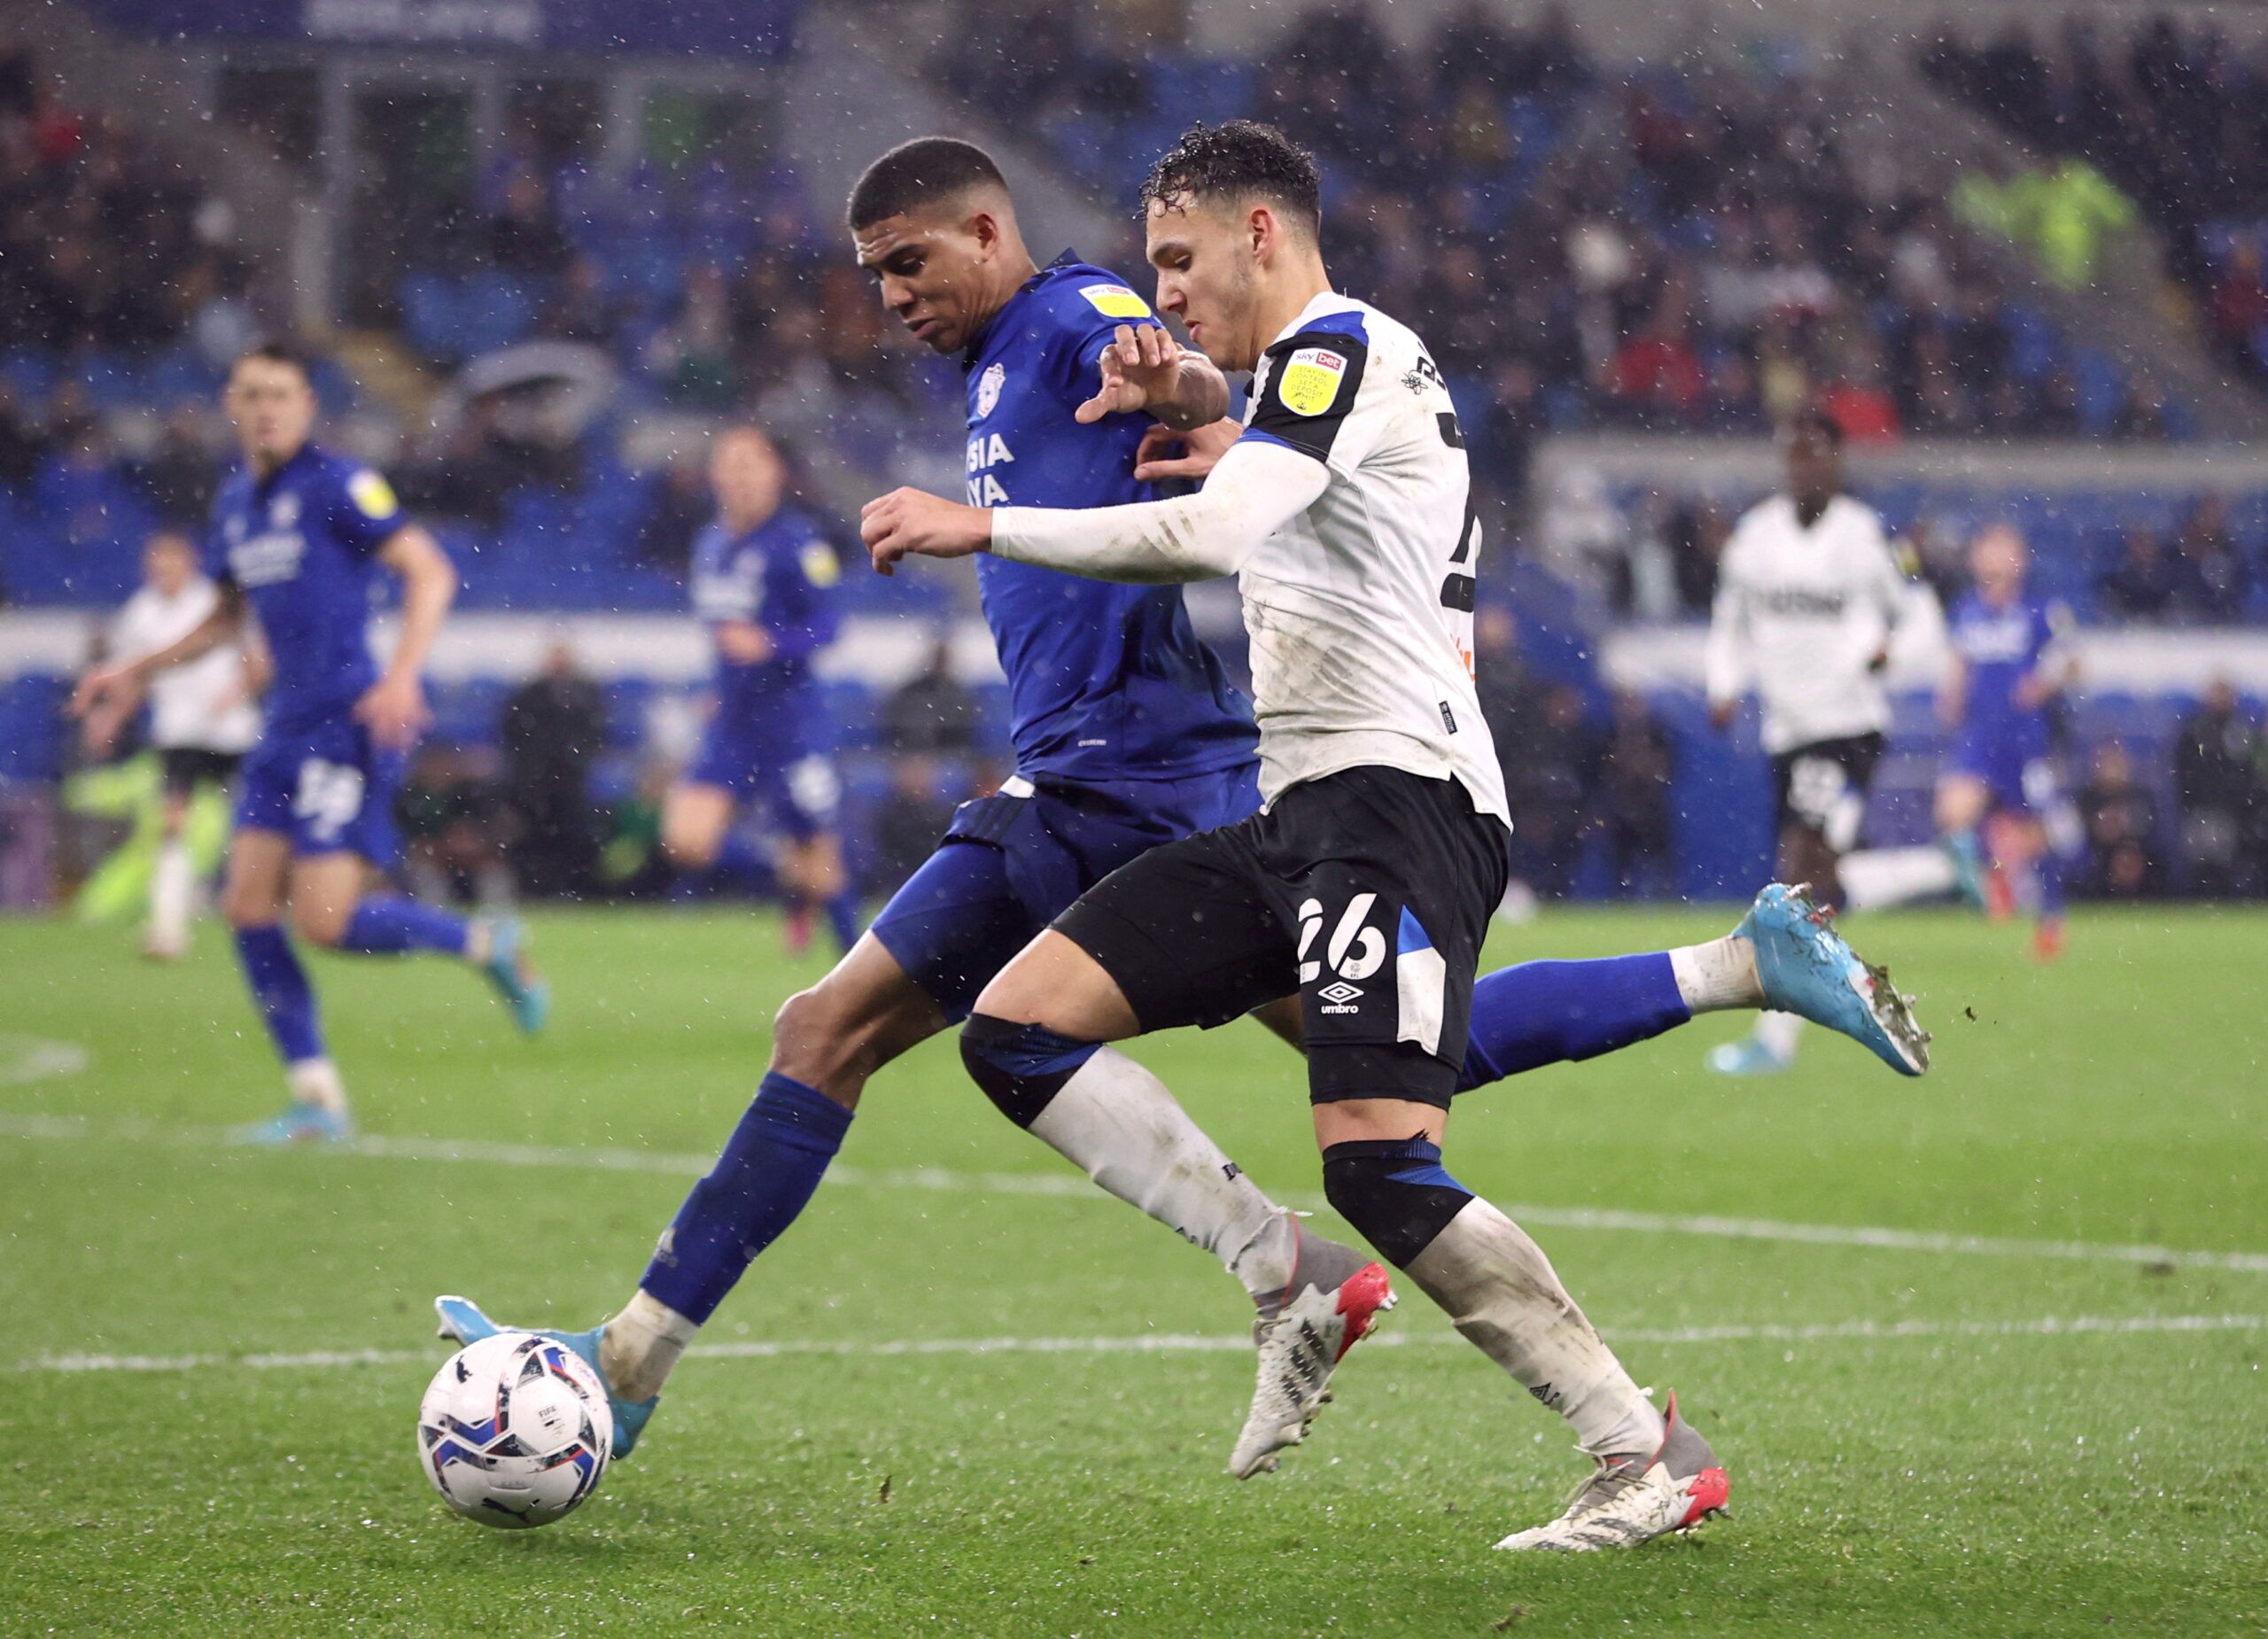 Soccer Football - Championship - Cardiff City v Derby County - Cardiff City Stadium, Cardiff, Britain - March 1, 2022  Derby County's Lee Buchanan in action with Cardiff City's Cody Drameh  Action Images/Molly Darlington  EDITORIAL USE ONLY. No use with unauthorized audio, video, data, fixture lists, club/league logos or 